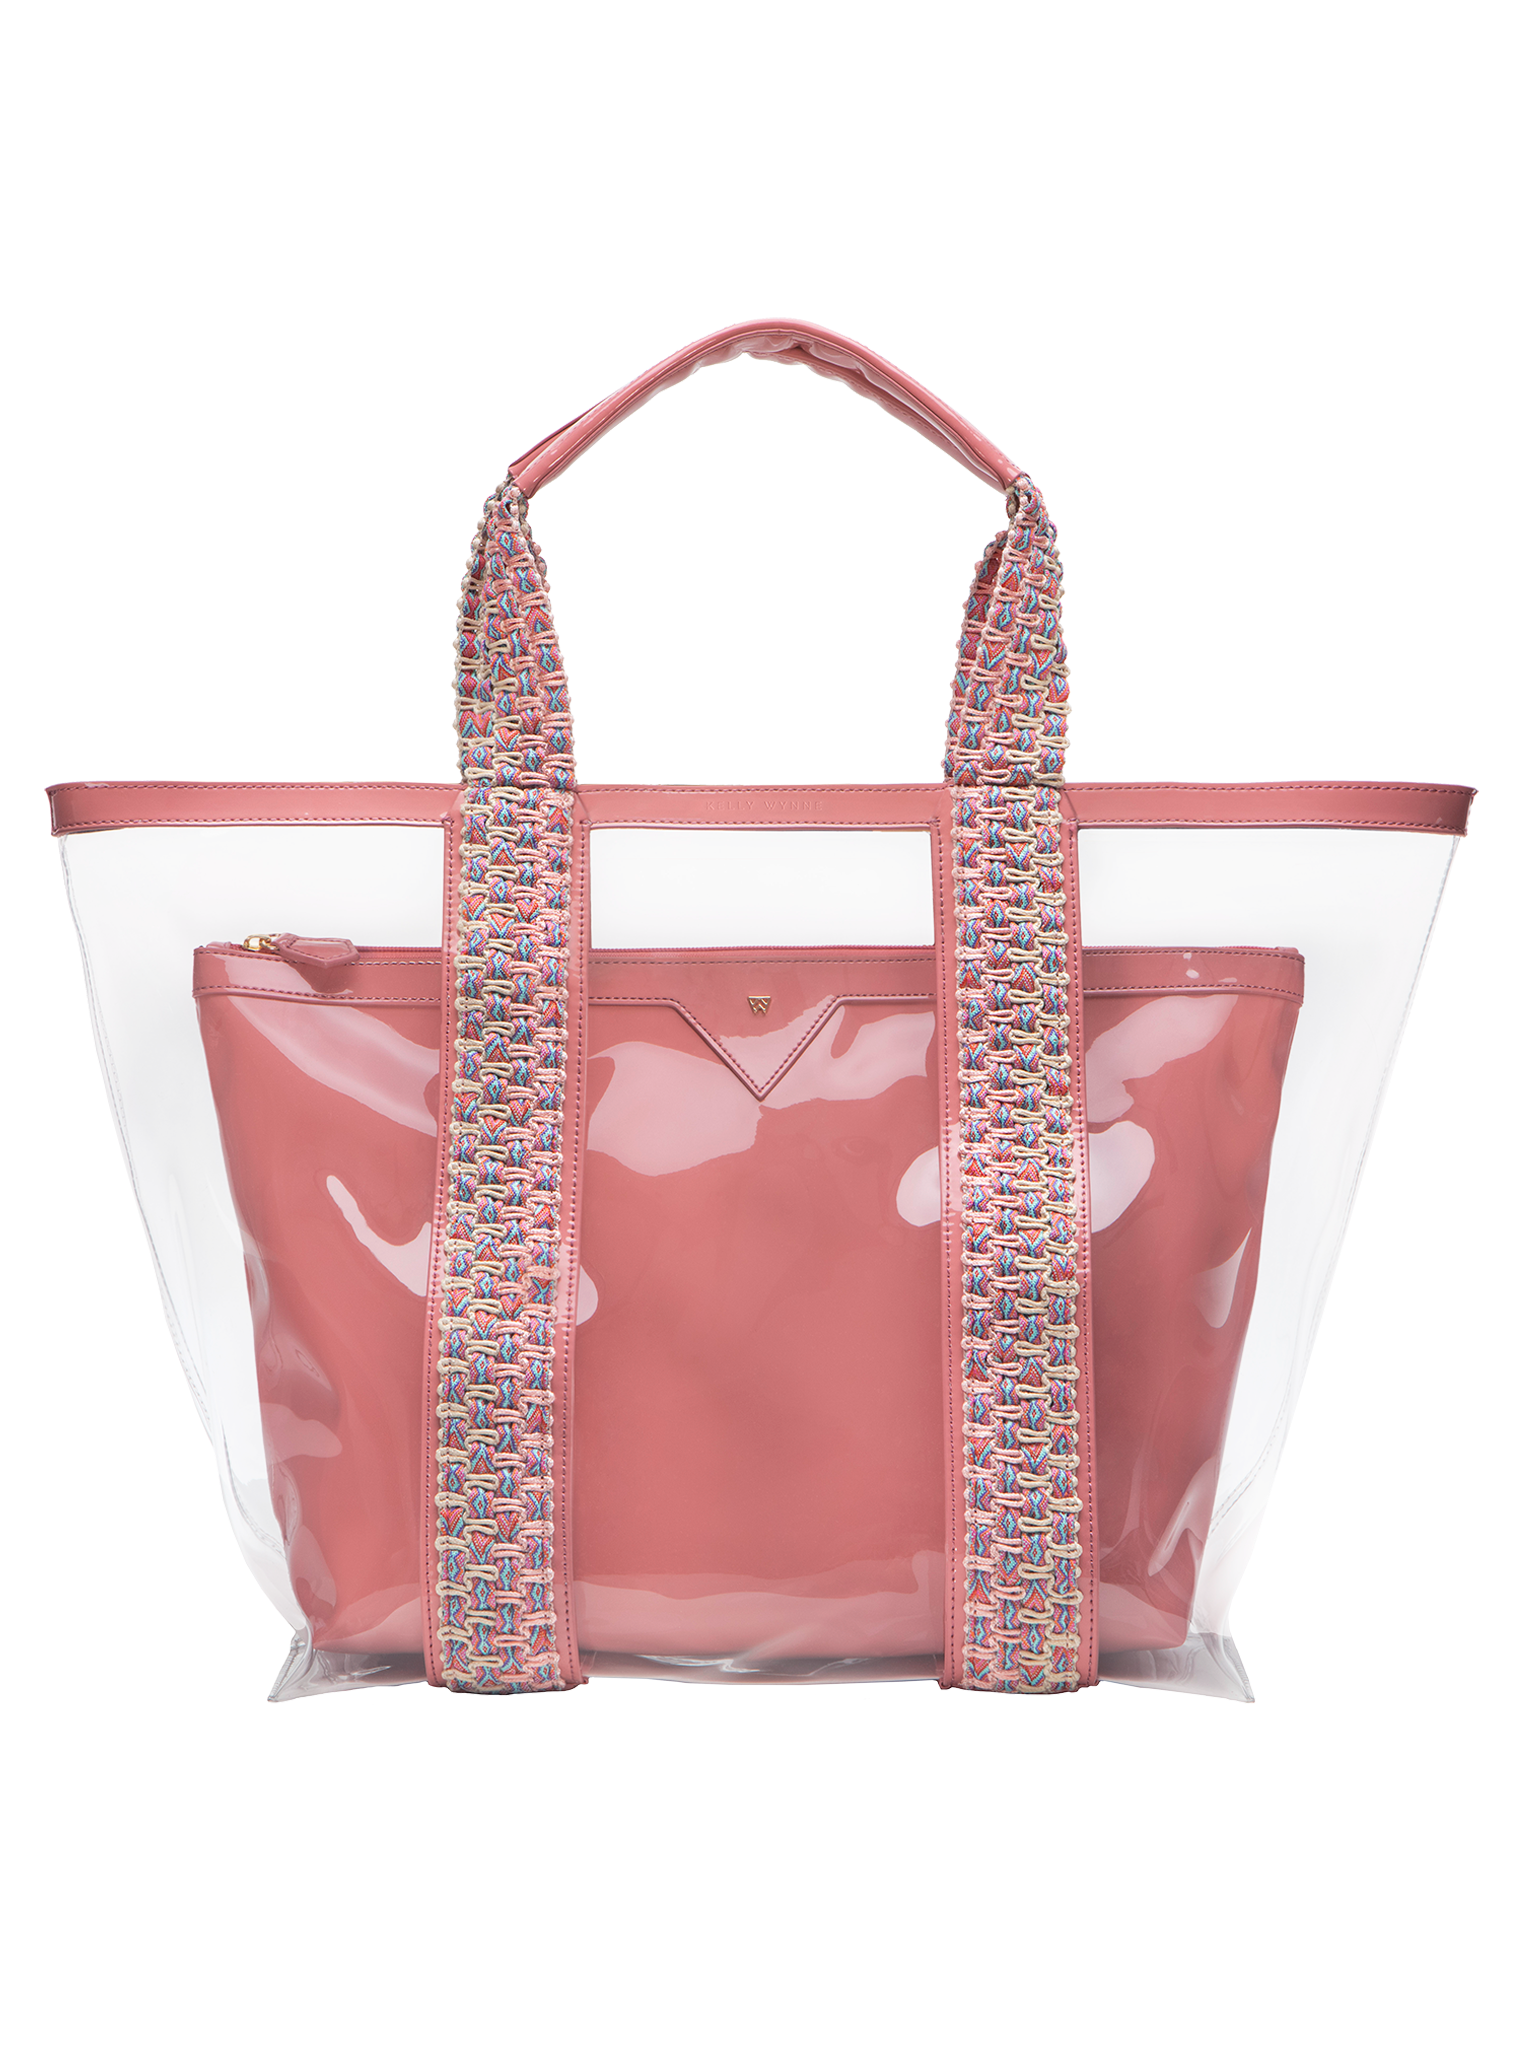 Water resistant, high-quality beach bag. Exterior tote in clear, interior patent leather pouch in rose 